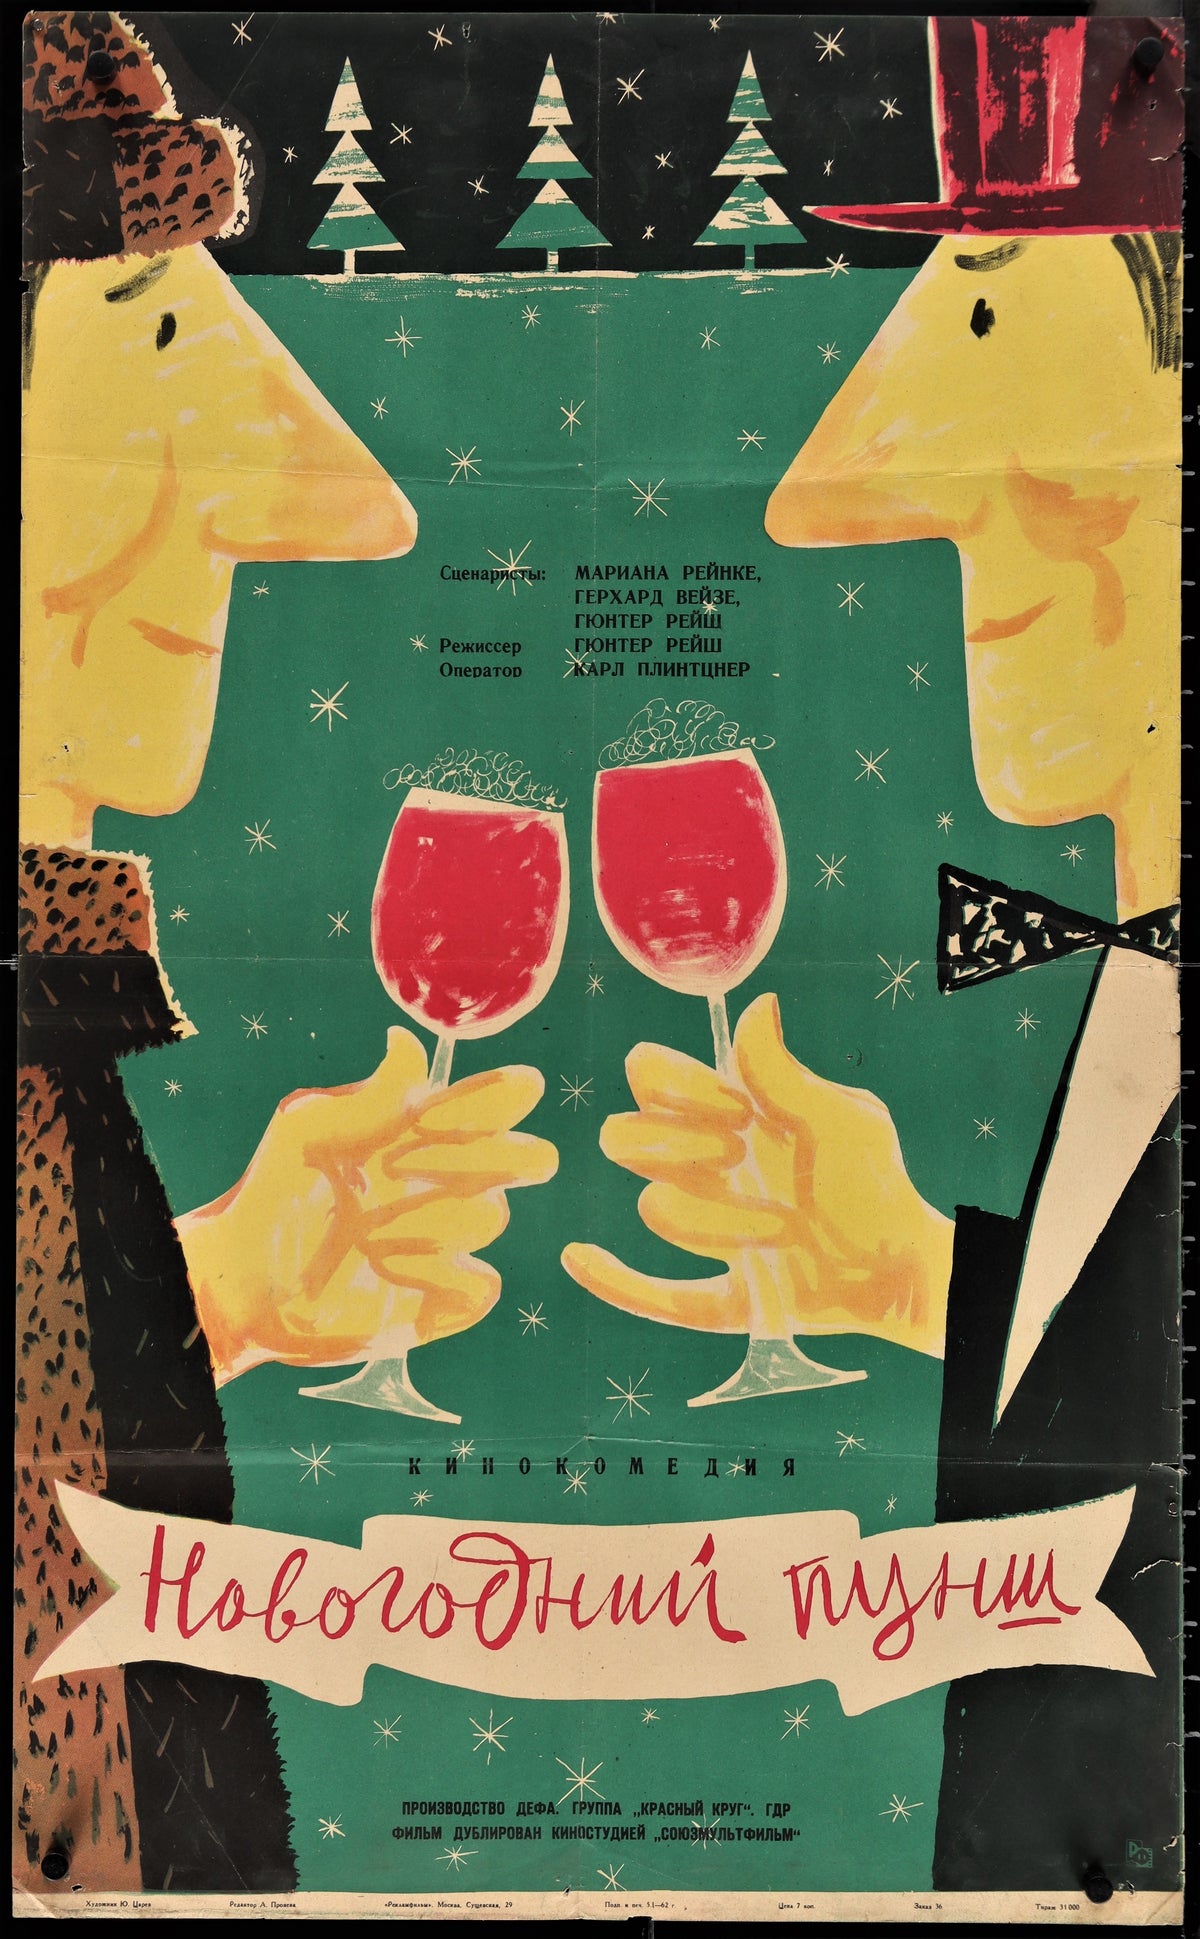 New Years Eve Punch- Russian Release - Authentic Vintage Poster